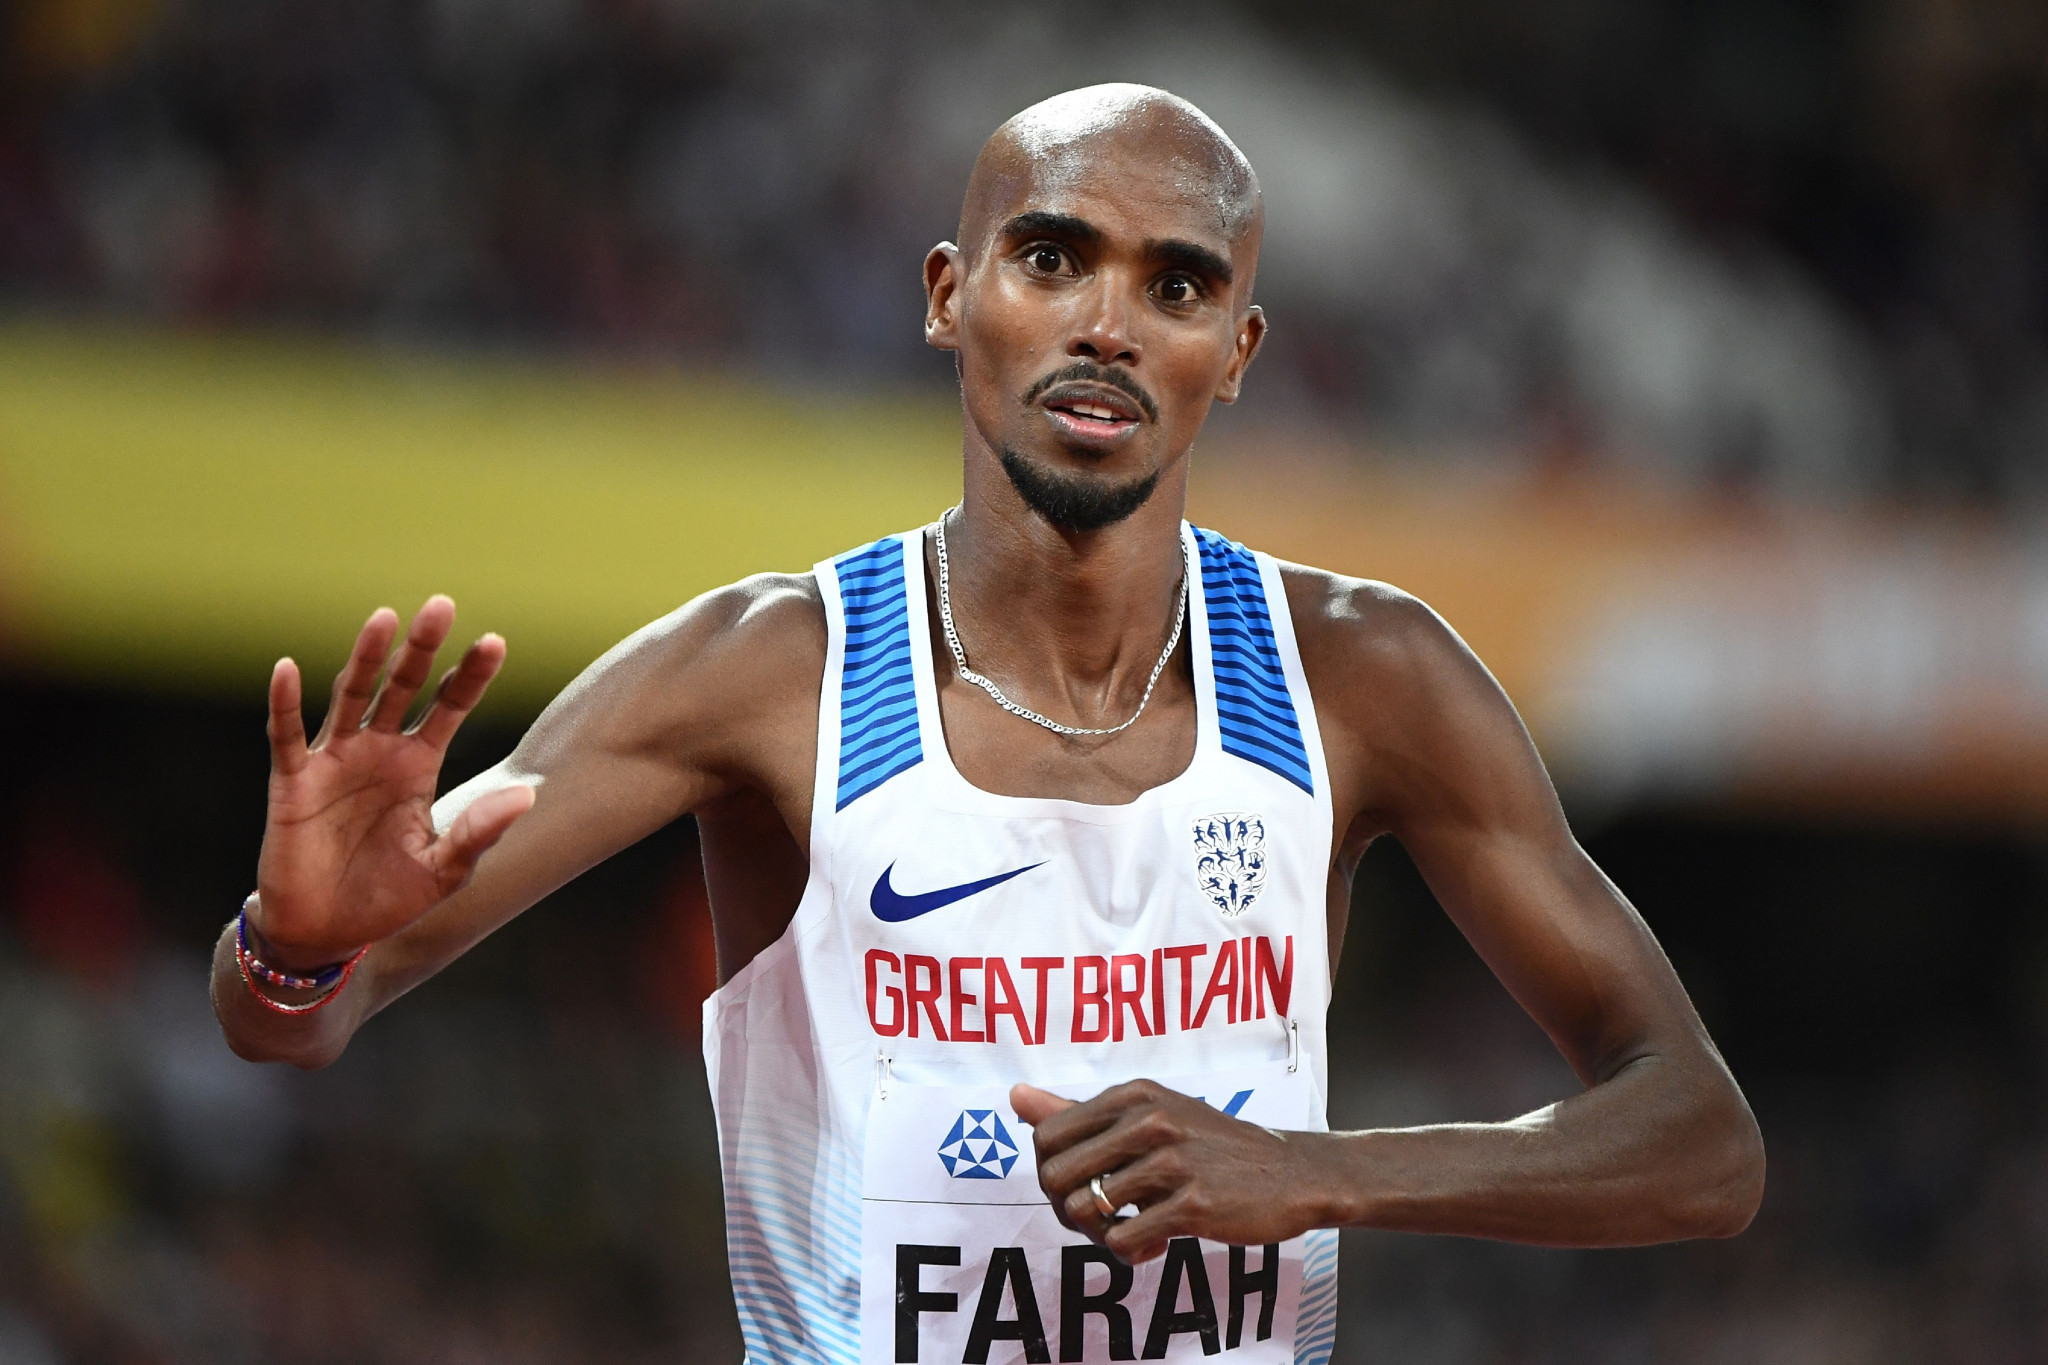 Britain's Sir Mo Farah has been shortlisted after his 10,000m gold at London 2017 ©Getty Images